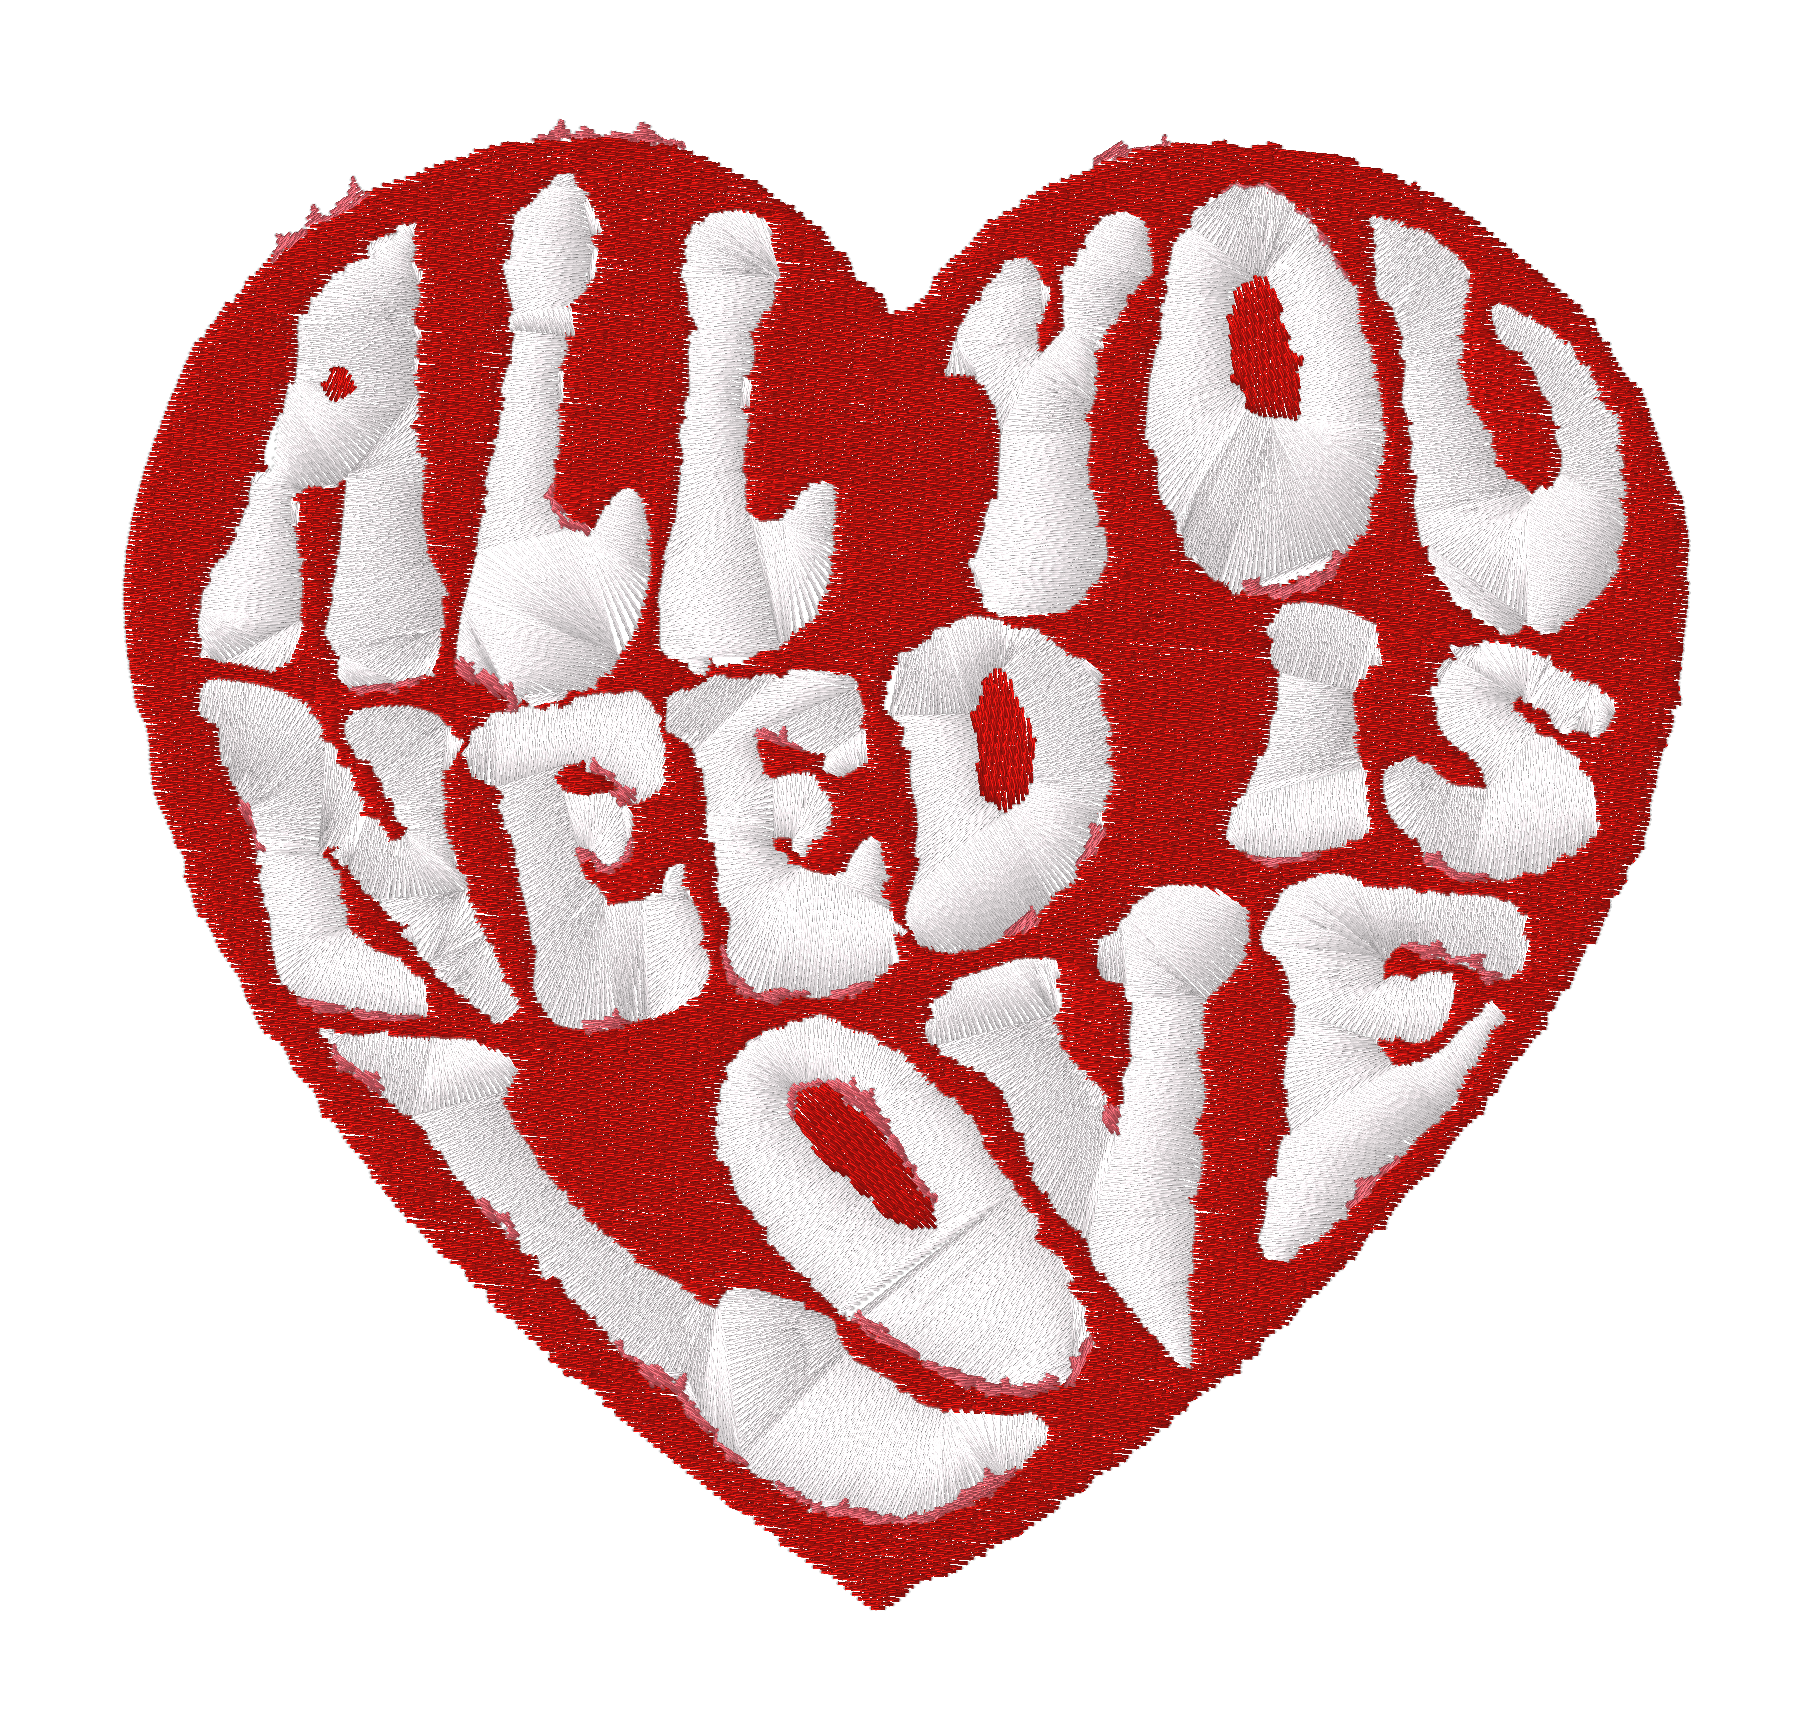 'ALL YOU NEED IS LOVE' RETRO 70'S BADGE EMBROIDERED BABY ROCKS 100% ORGANIC COTTON DENIM JACKET